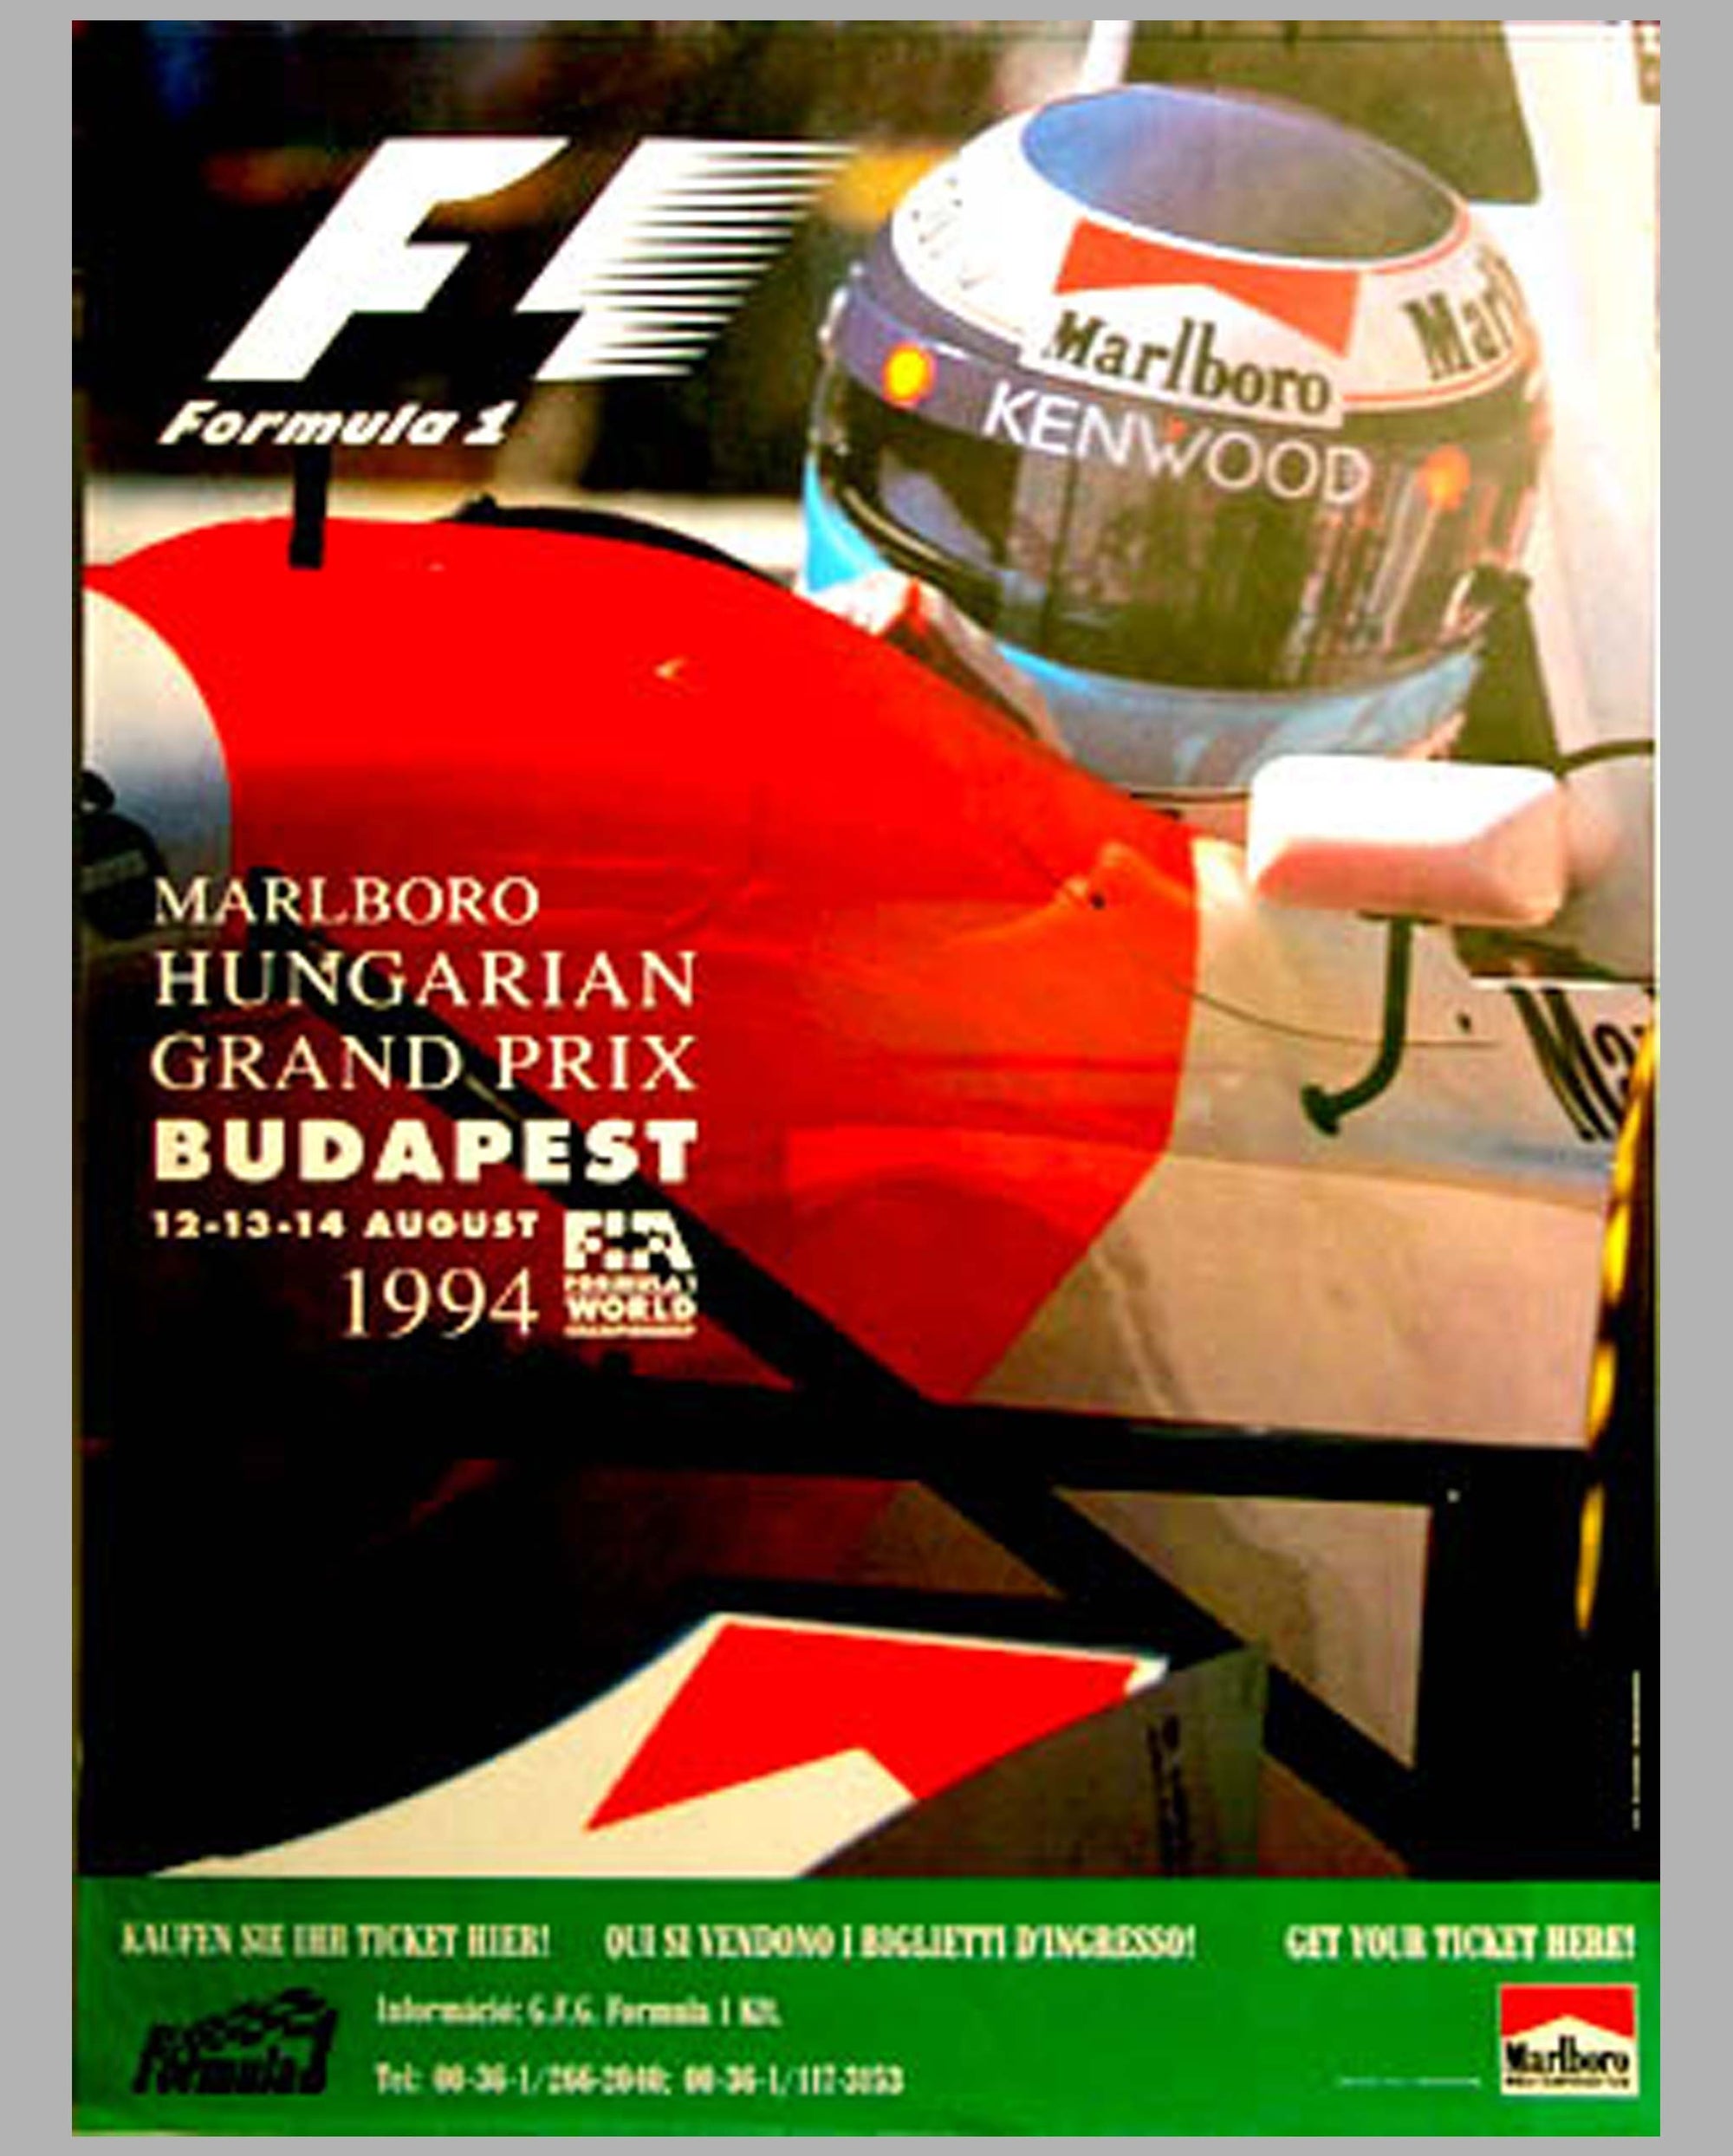 GP of Hungary - Budapest-1994 larger official event poster